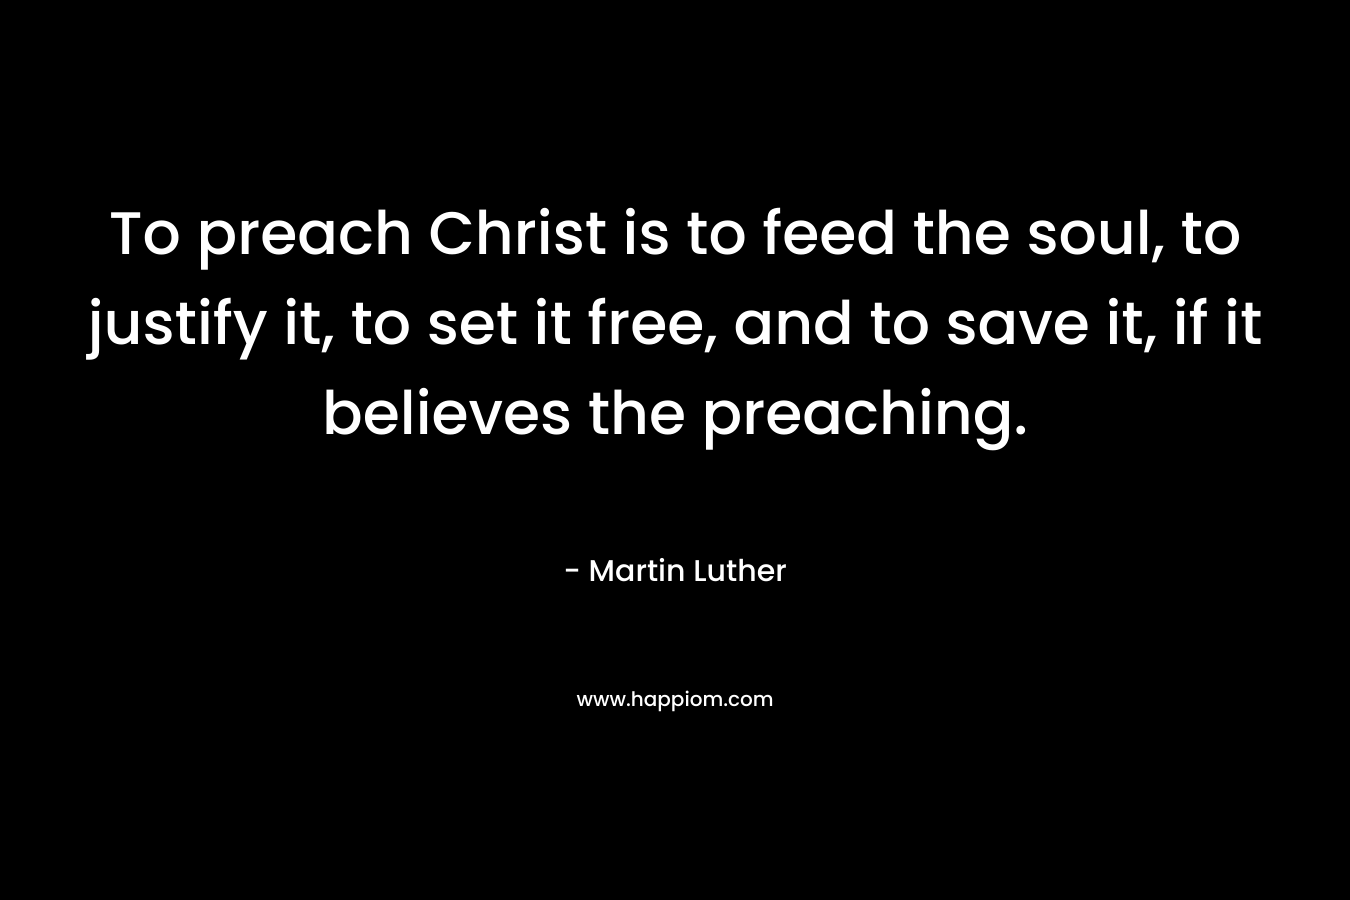 To preach Christ is to feed the soul, to justify it, to set it free, and to save it, if it believes the preaching. – Martin Luther